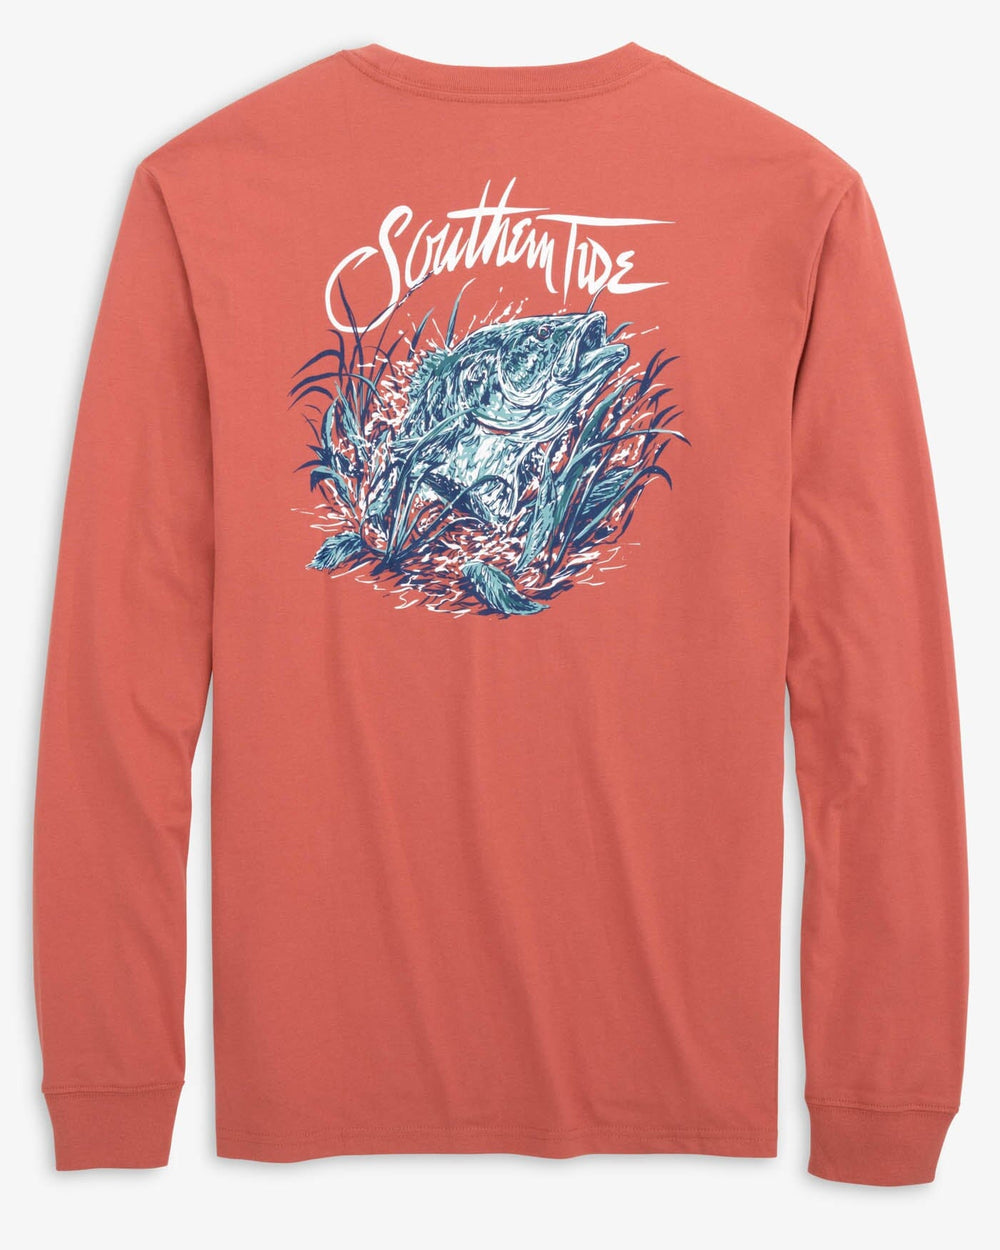 The back view of the Southern Tide Breakwater Bass Long Sleeve T-Shirt by Southern Tide - Dusty Coral